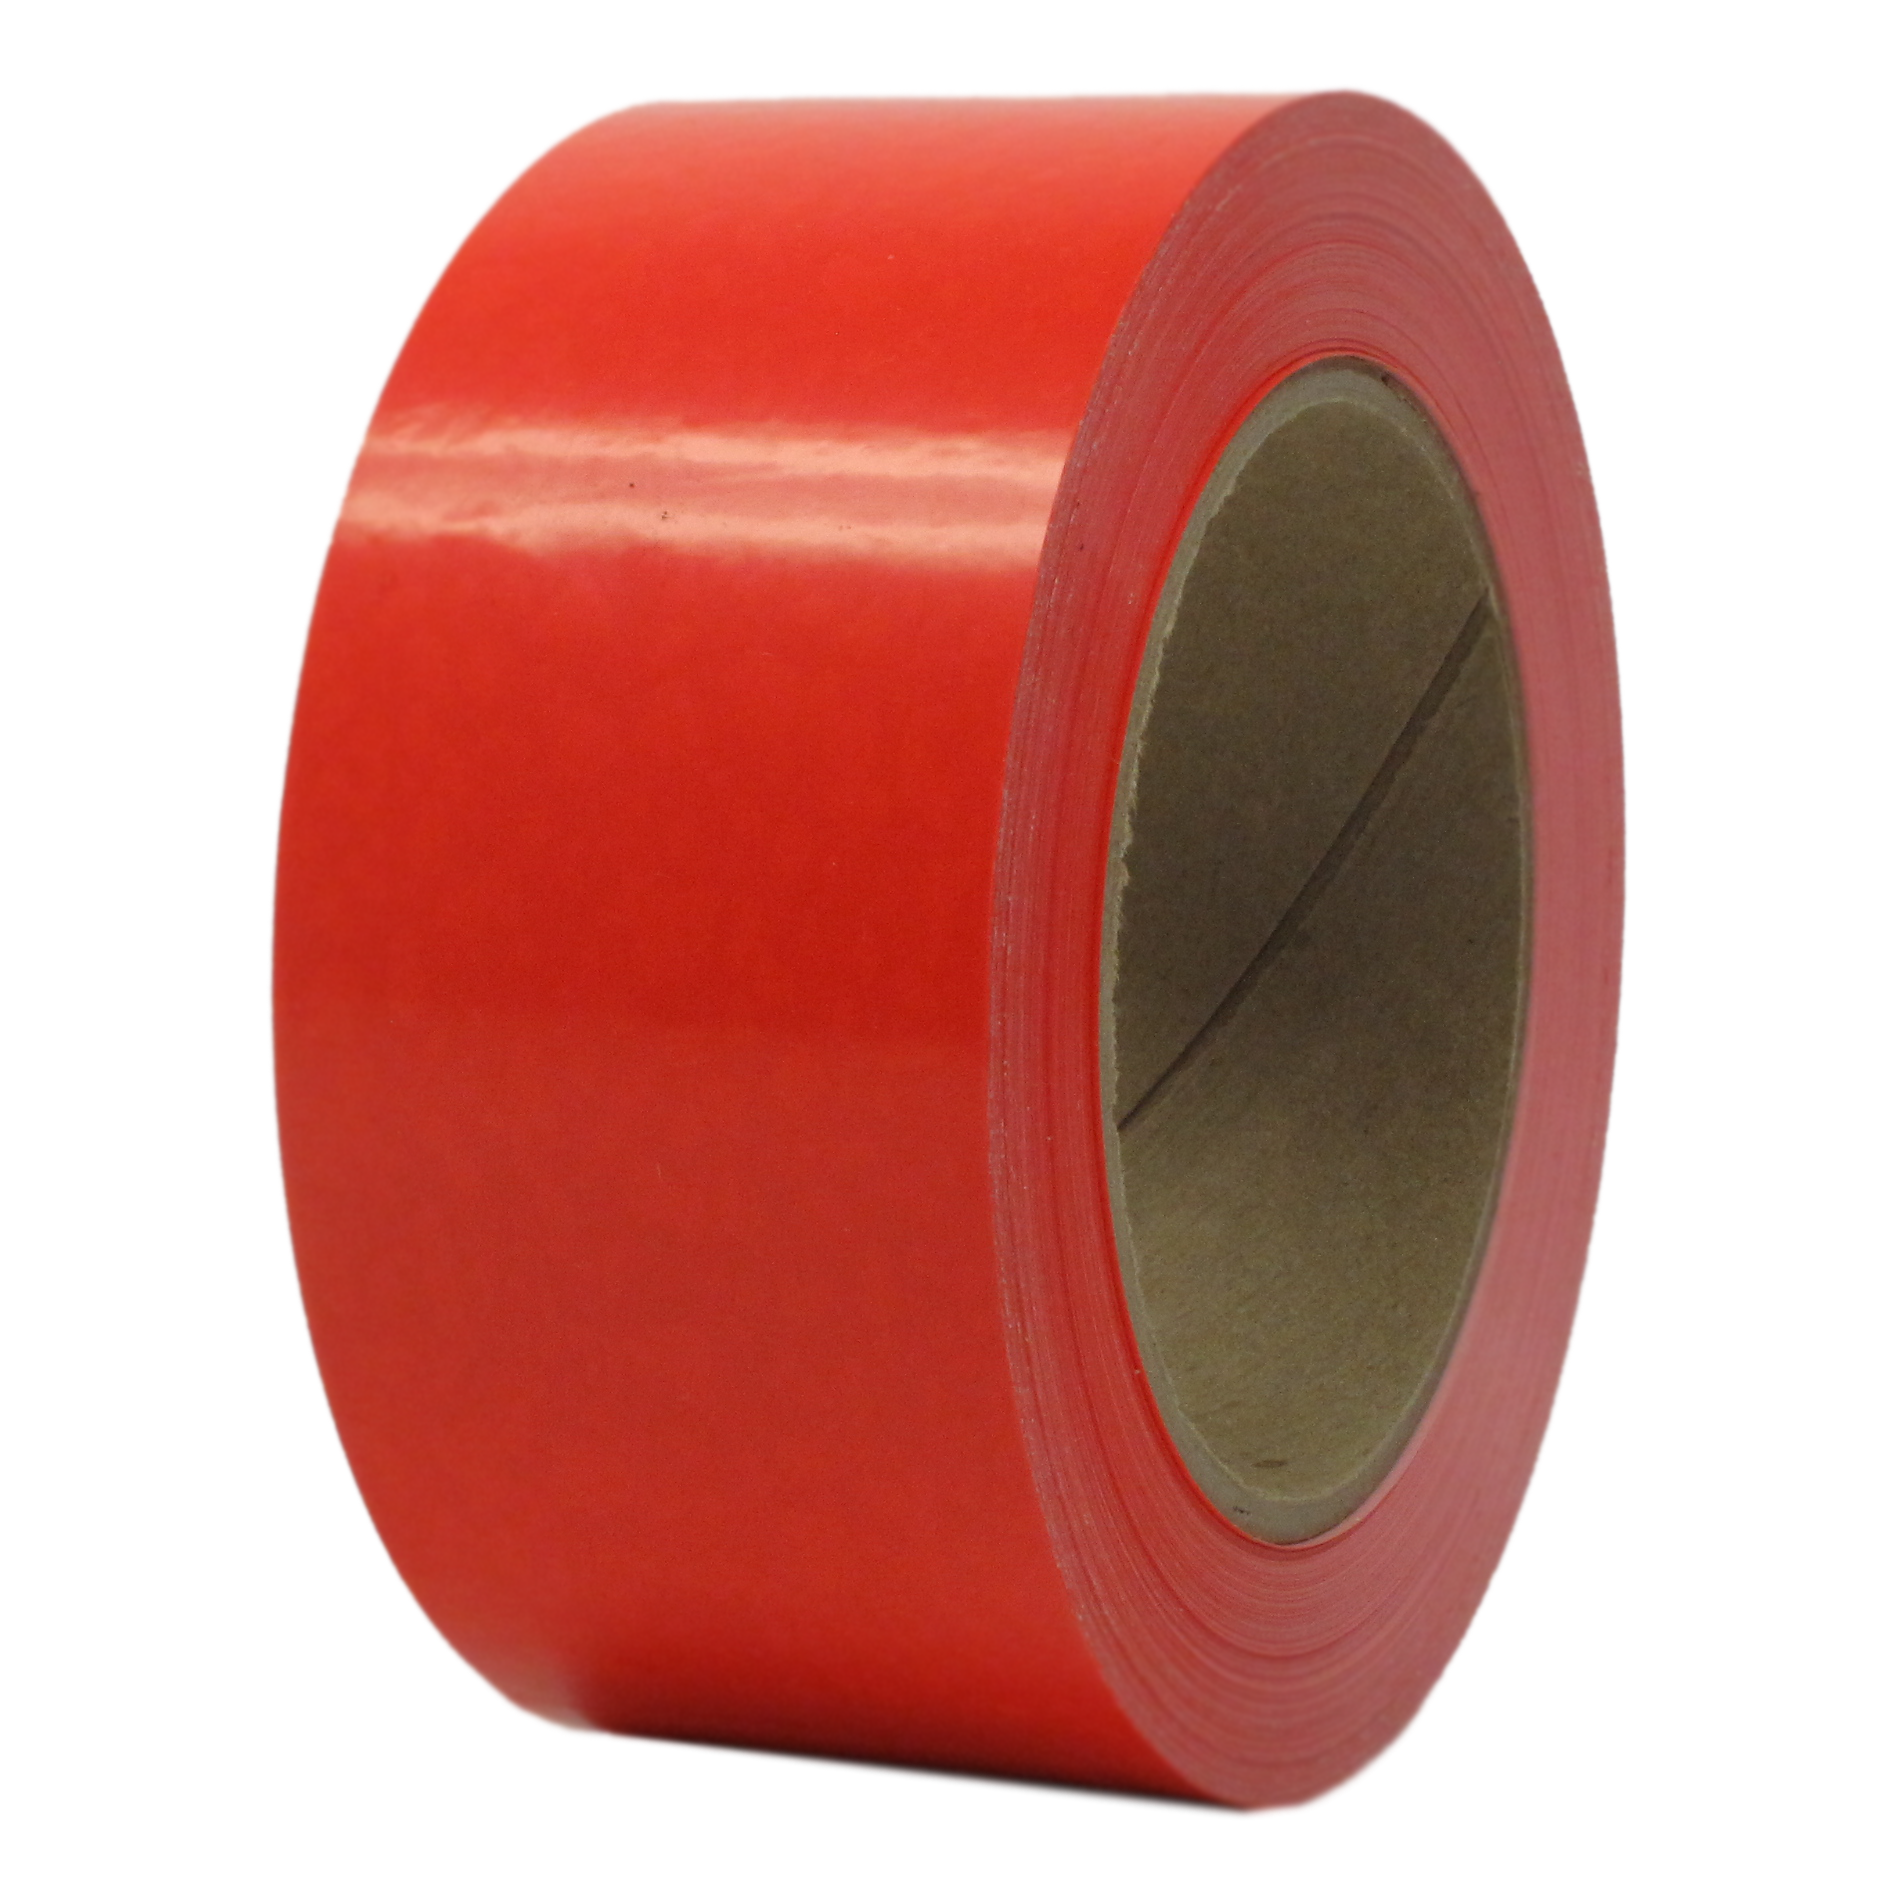 RED Color Tape 2 Wide 110yd 12pk tape,packaging,box,adhesiveshipping  supplies